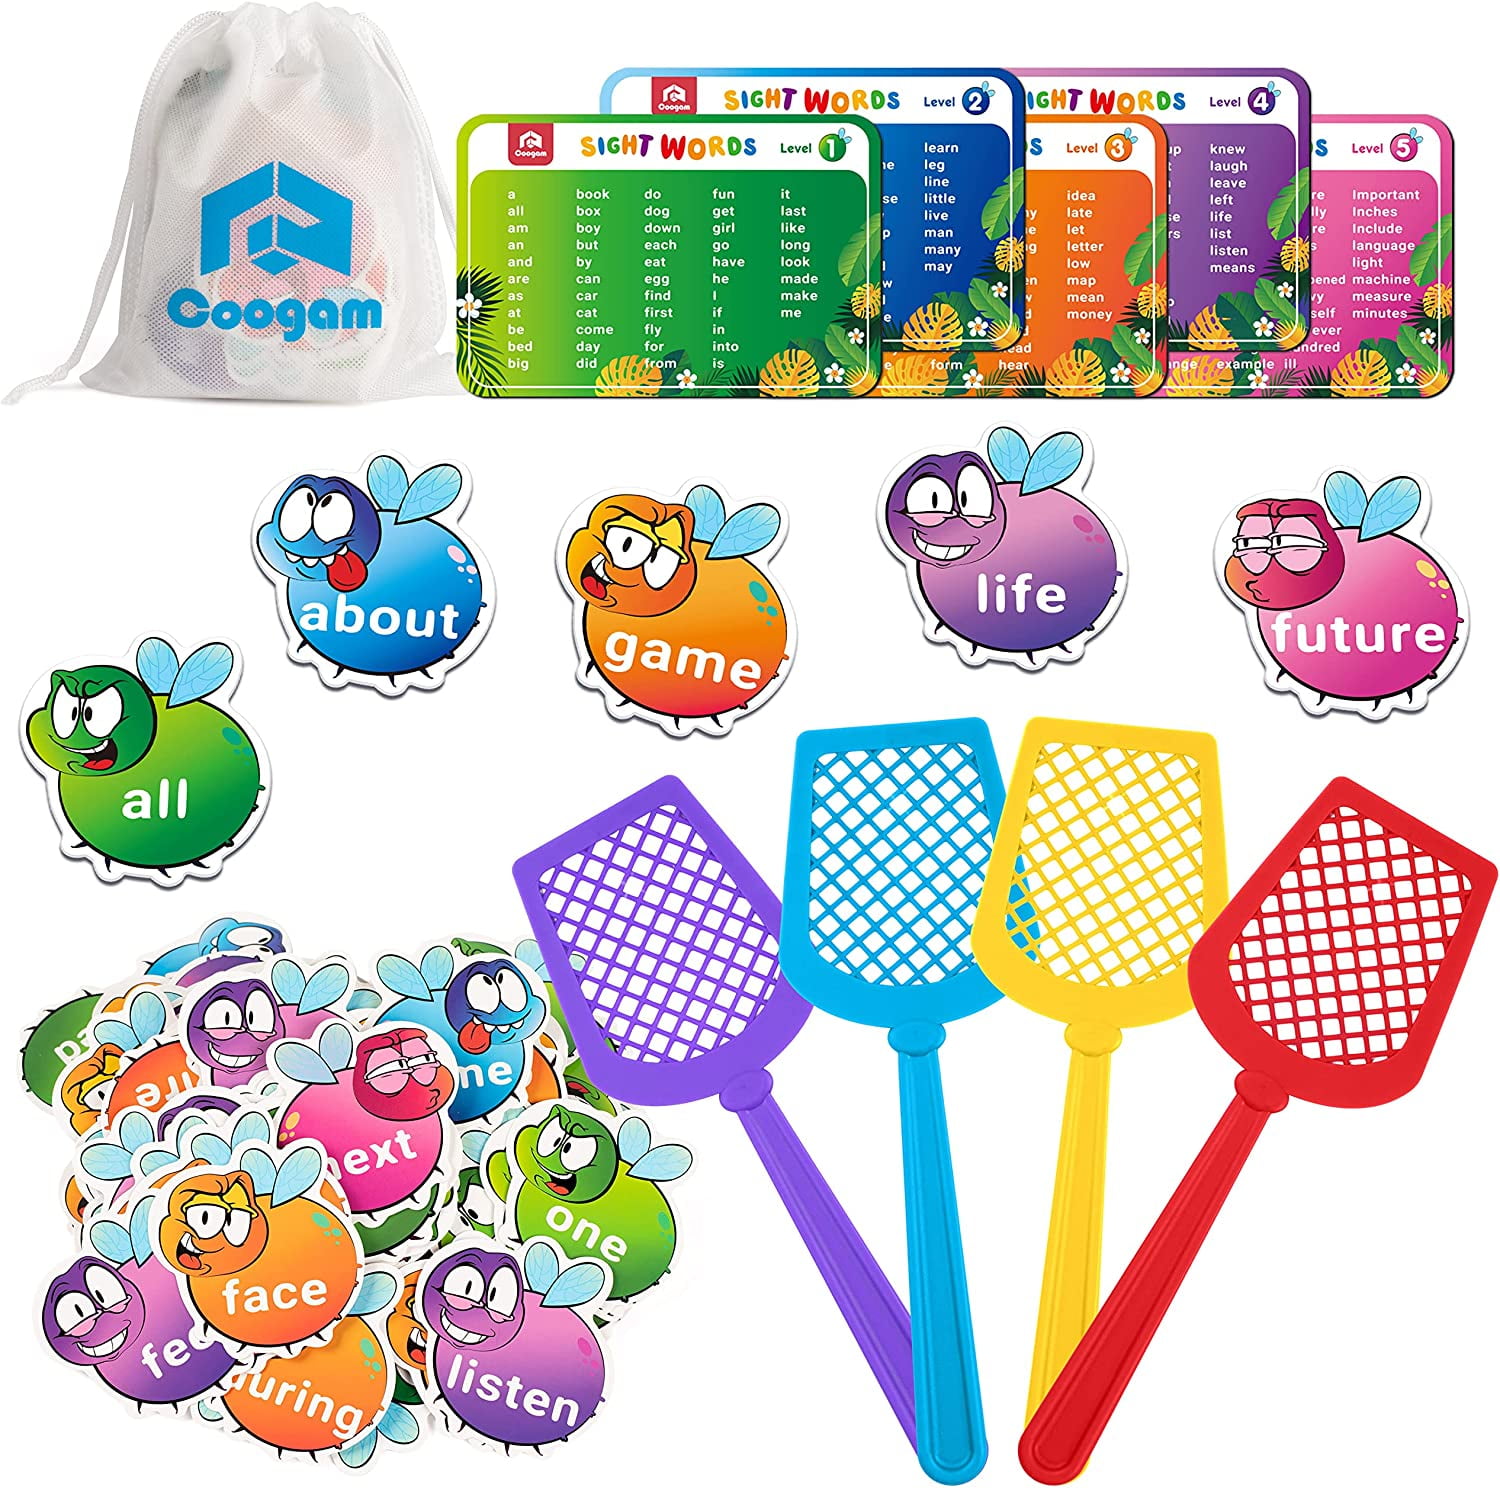 Coogam Sight Words Game with 400 Fry Site Words and 4 Fly Swatters